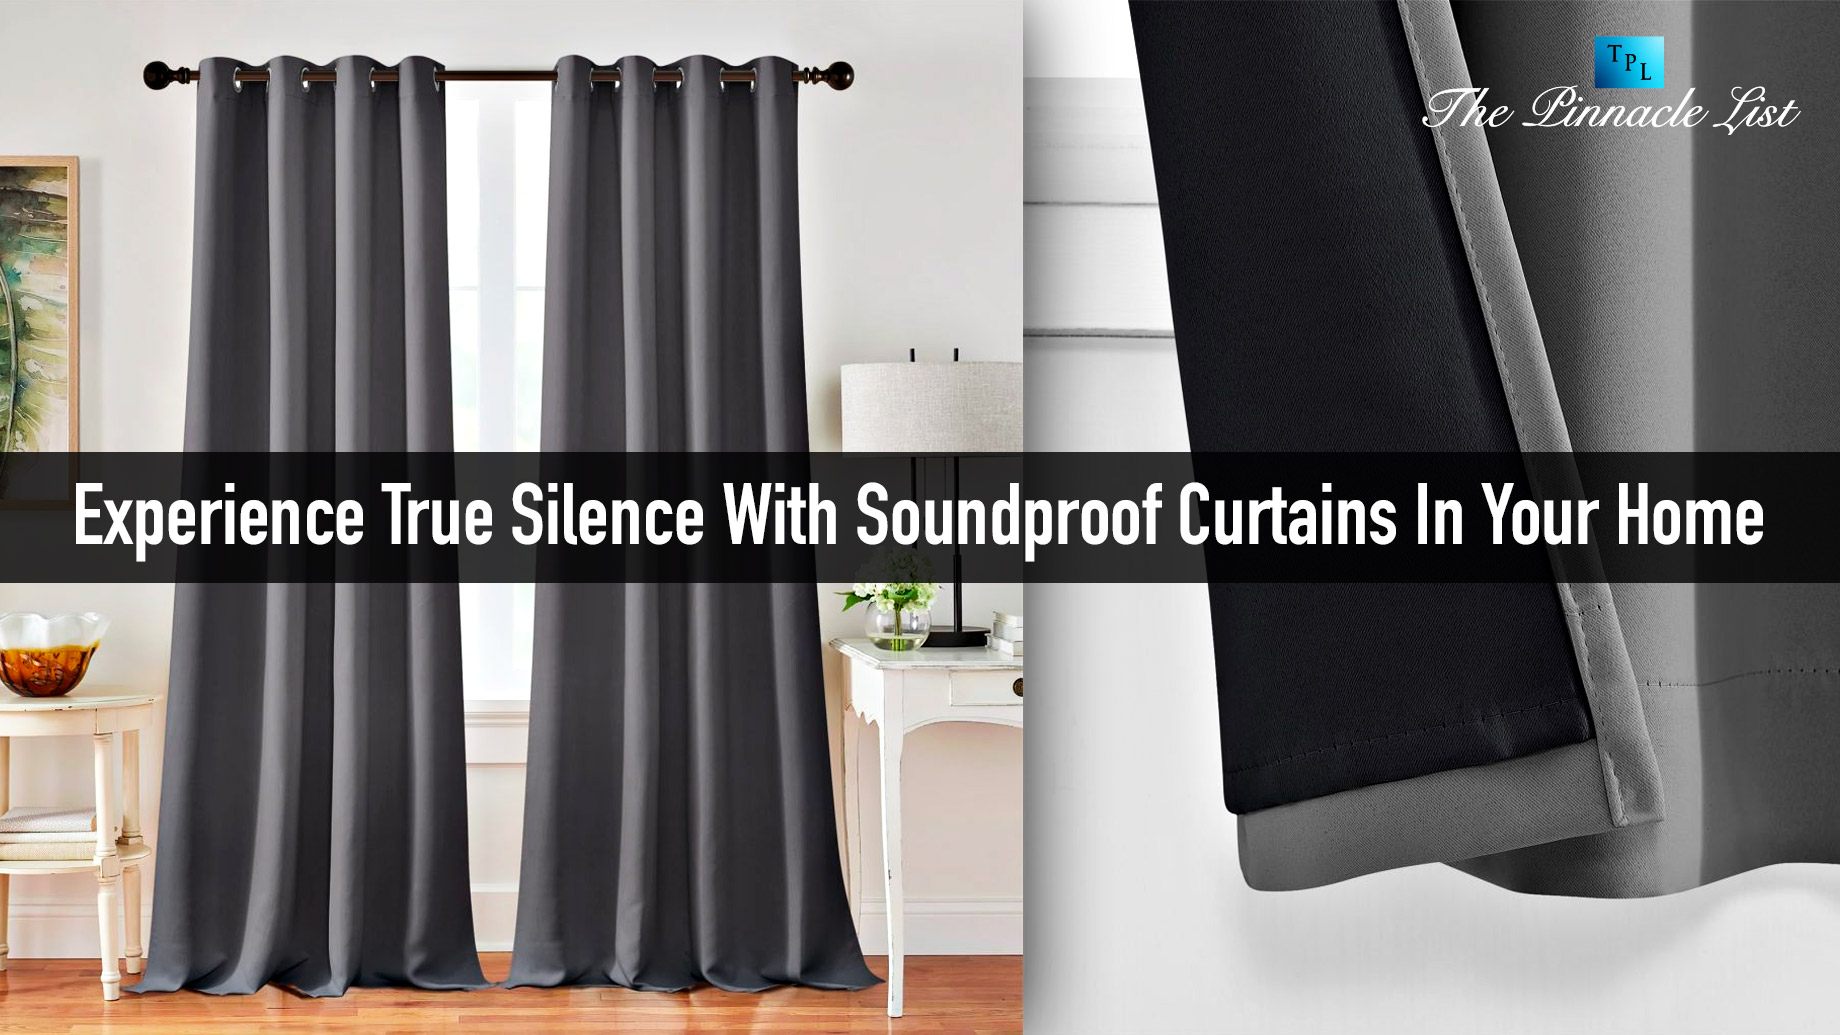 Experience True Silence With Soundproof Curtains In Your Home